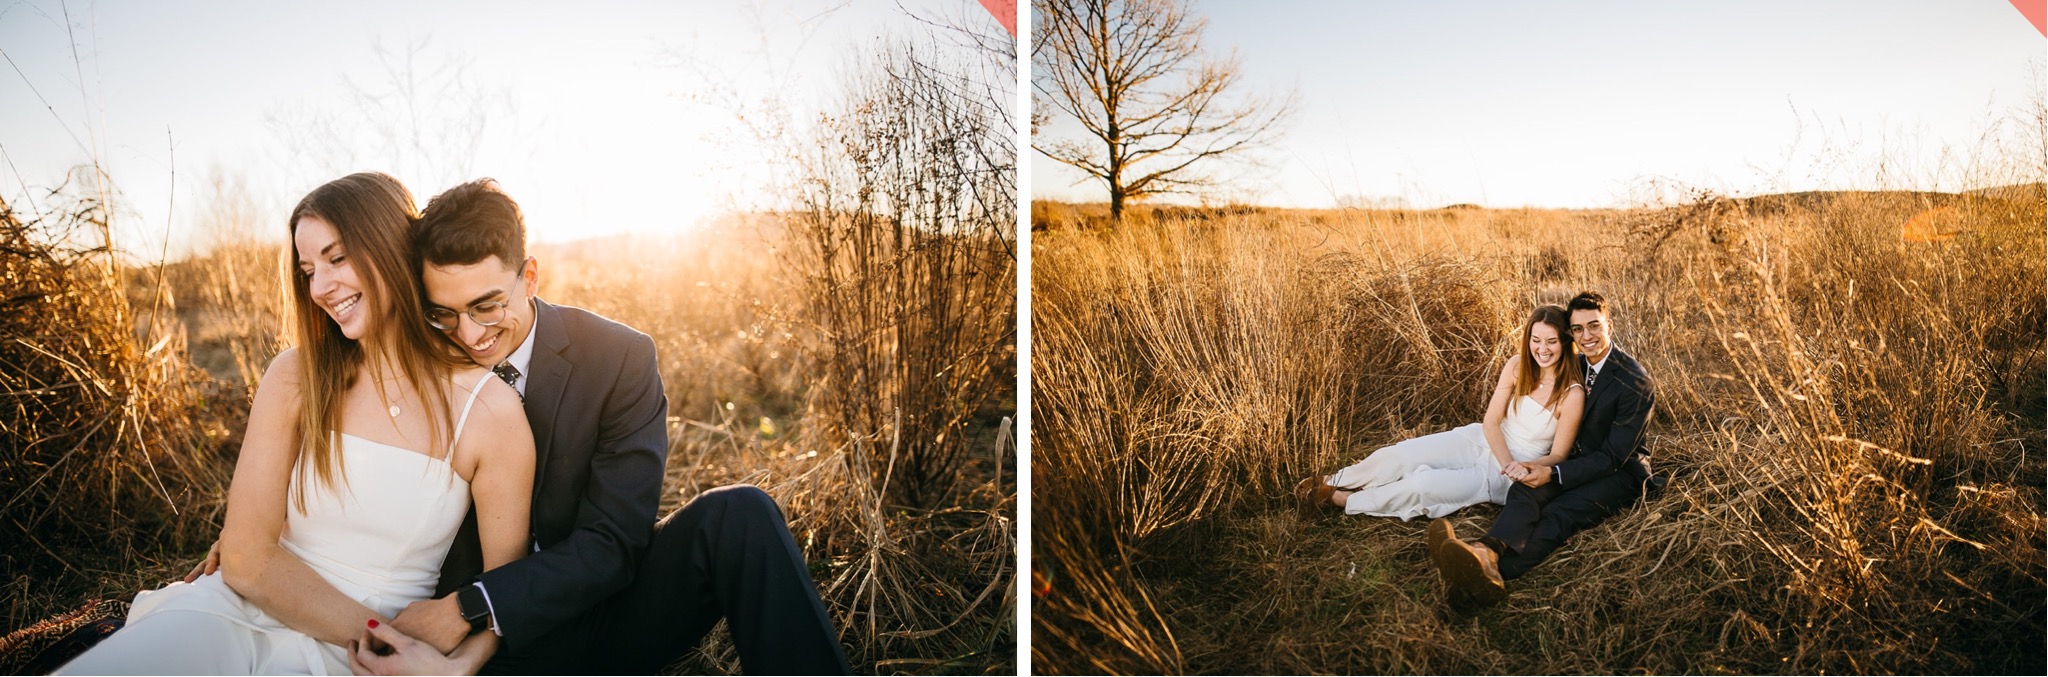 Man and woman snuggle up in a field of tall brown grass.